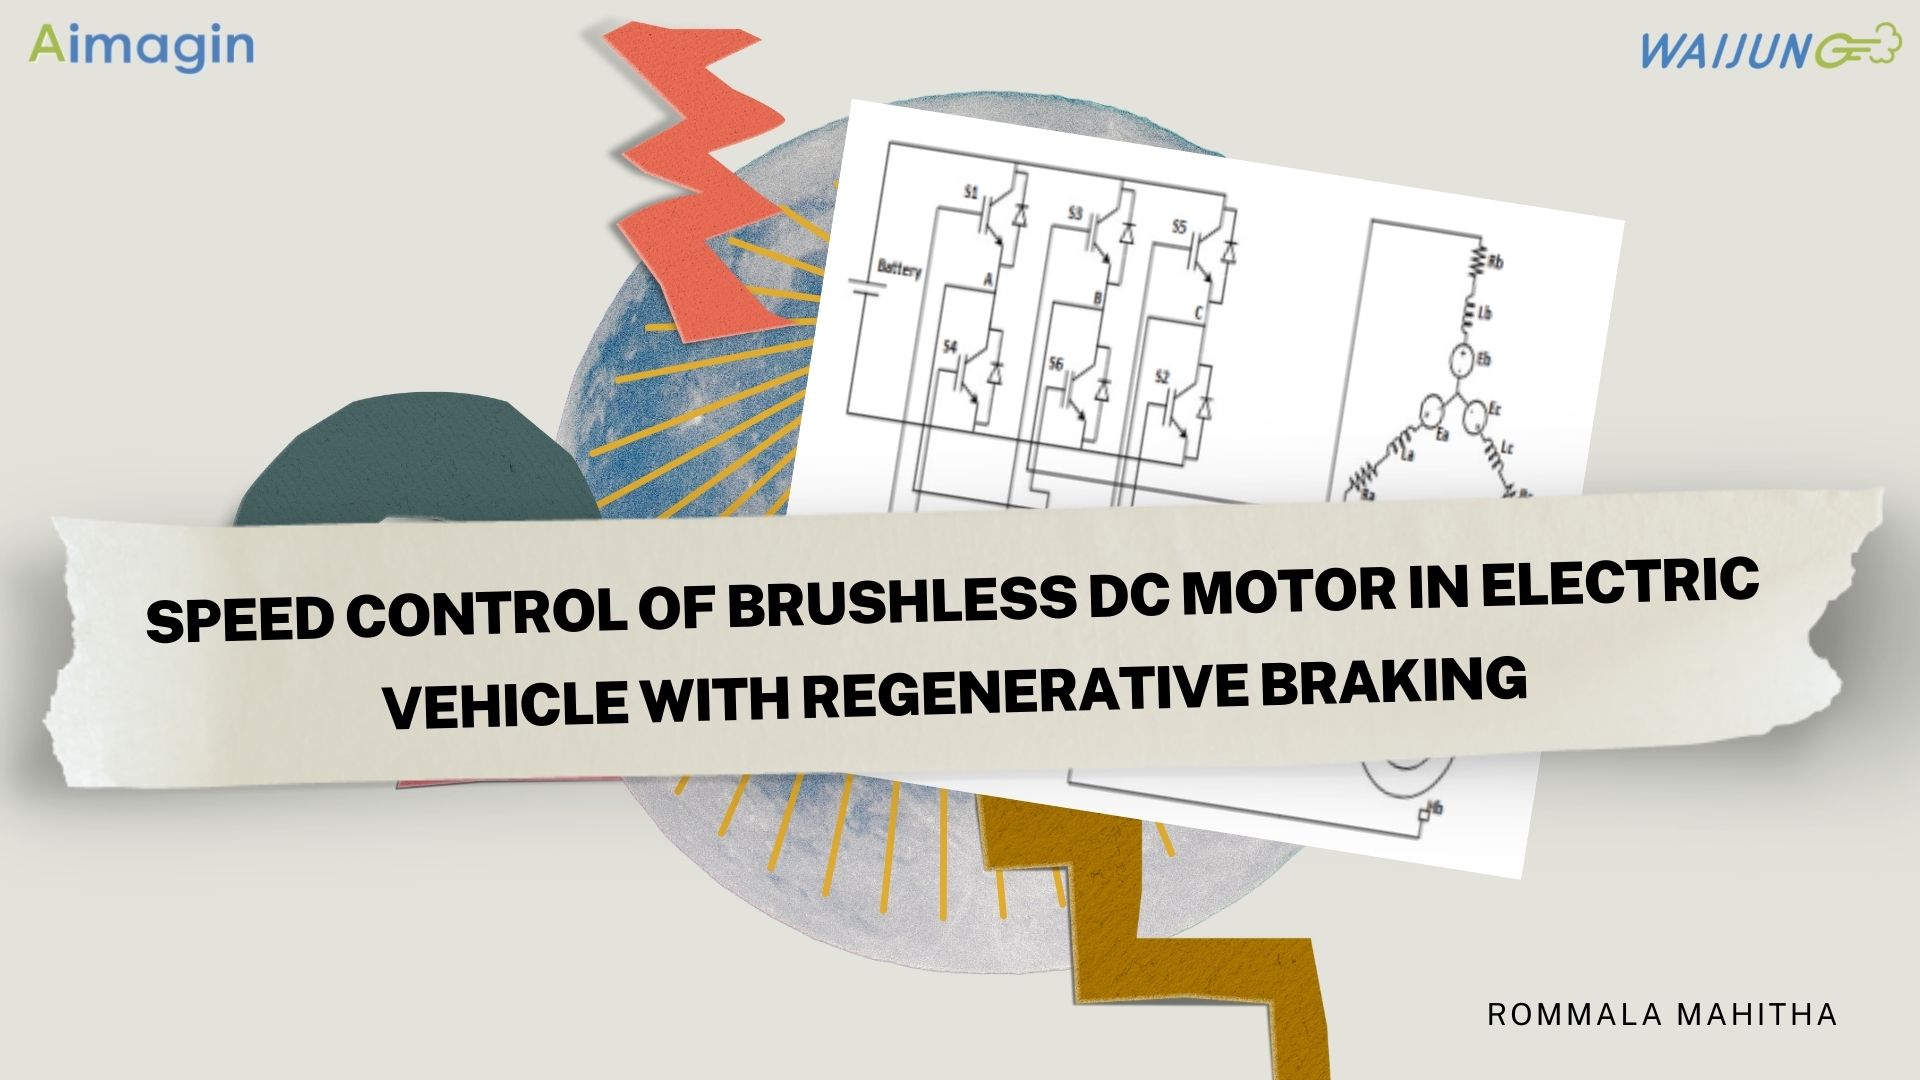 Speed Control of Brushless DC Motor in Electric Vehicle with Regenerative Braking